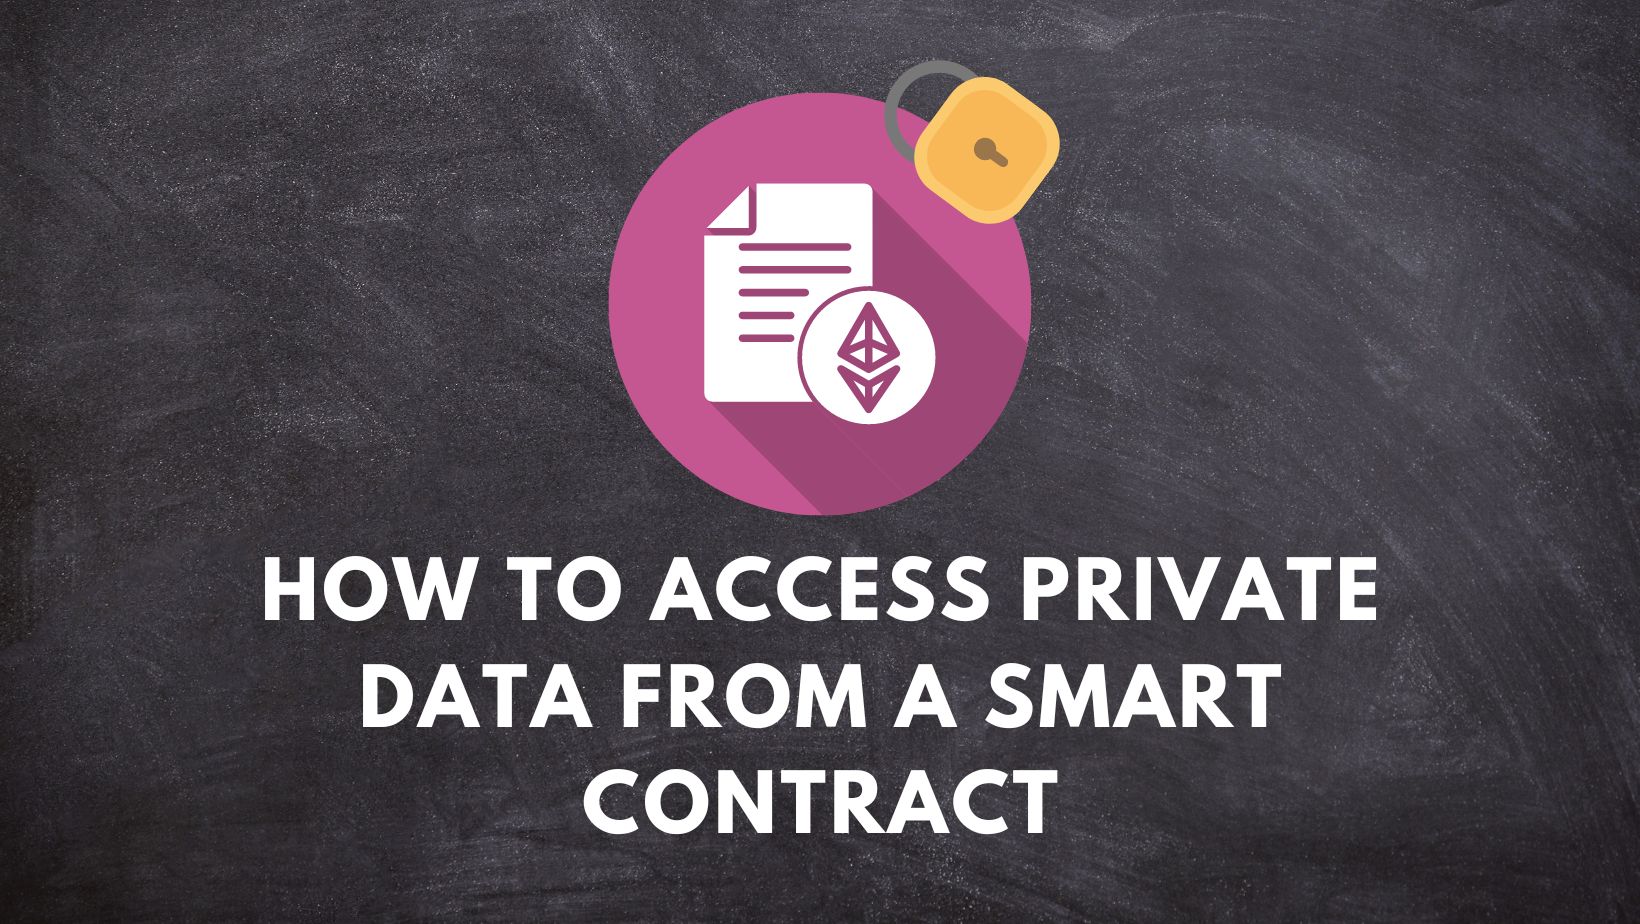 How to access private data from a smart contract